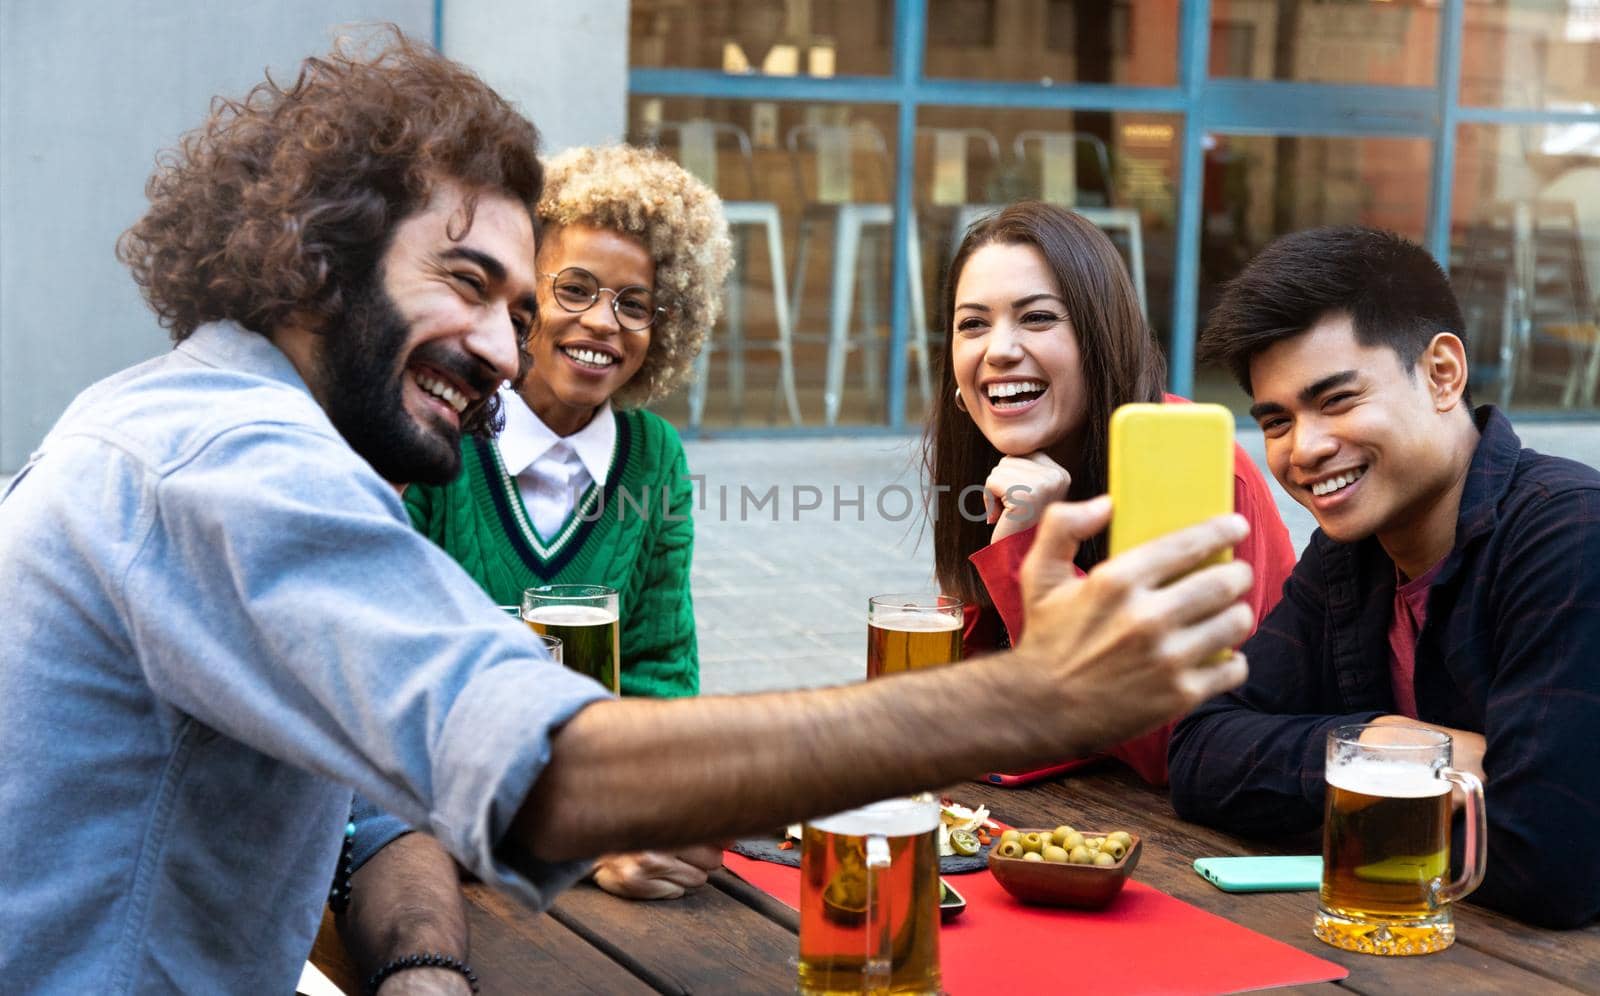 Multiracial group of friends at a bar drinking beer look at cellphone together. Video call. Friendship and technology concept.